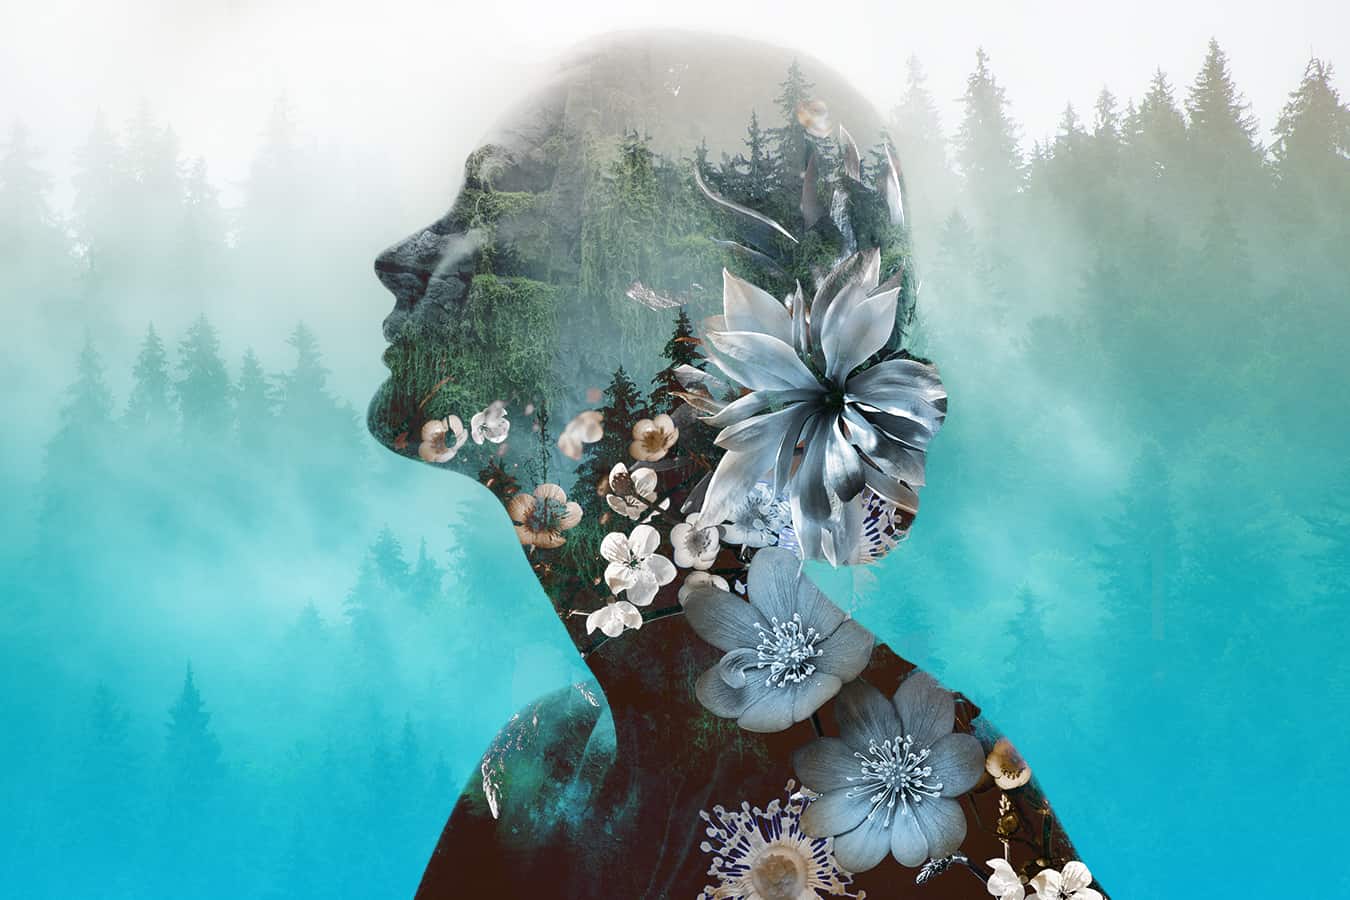 Silhouette of woman with flowers and forest background.